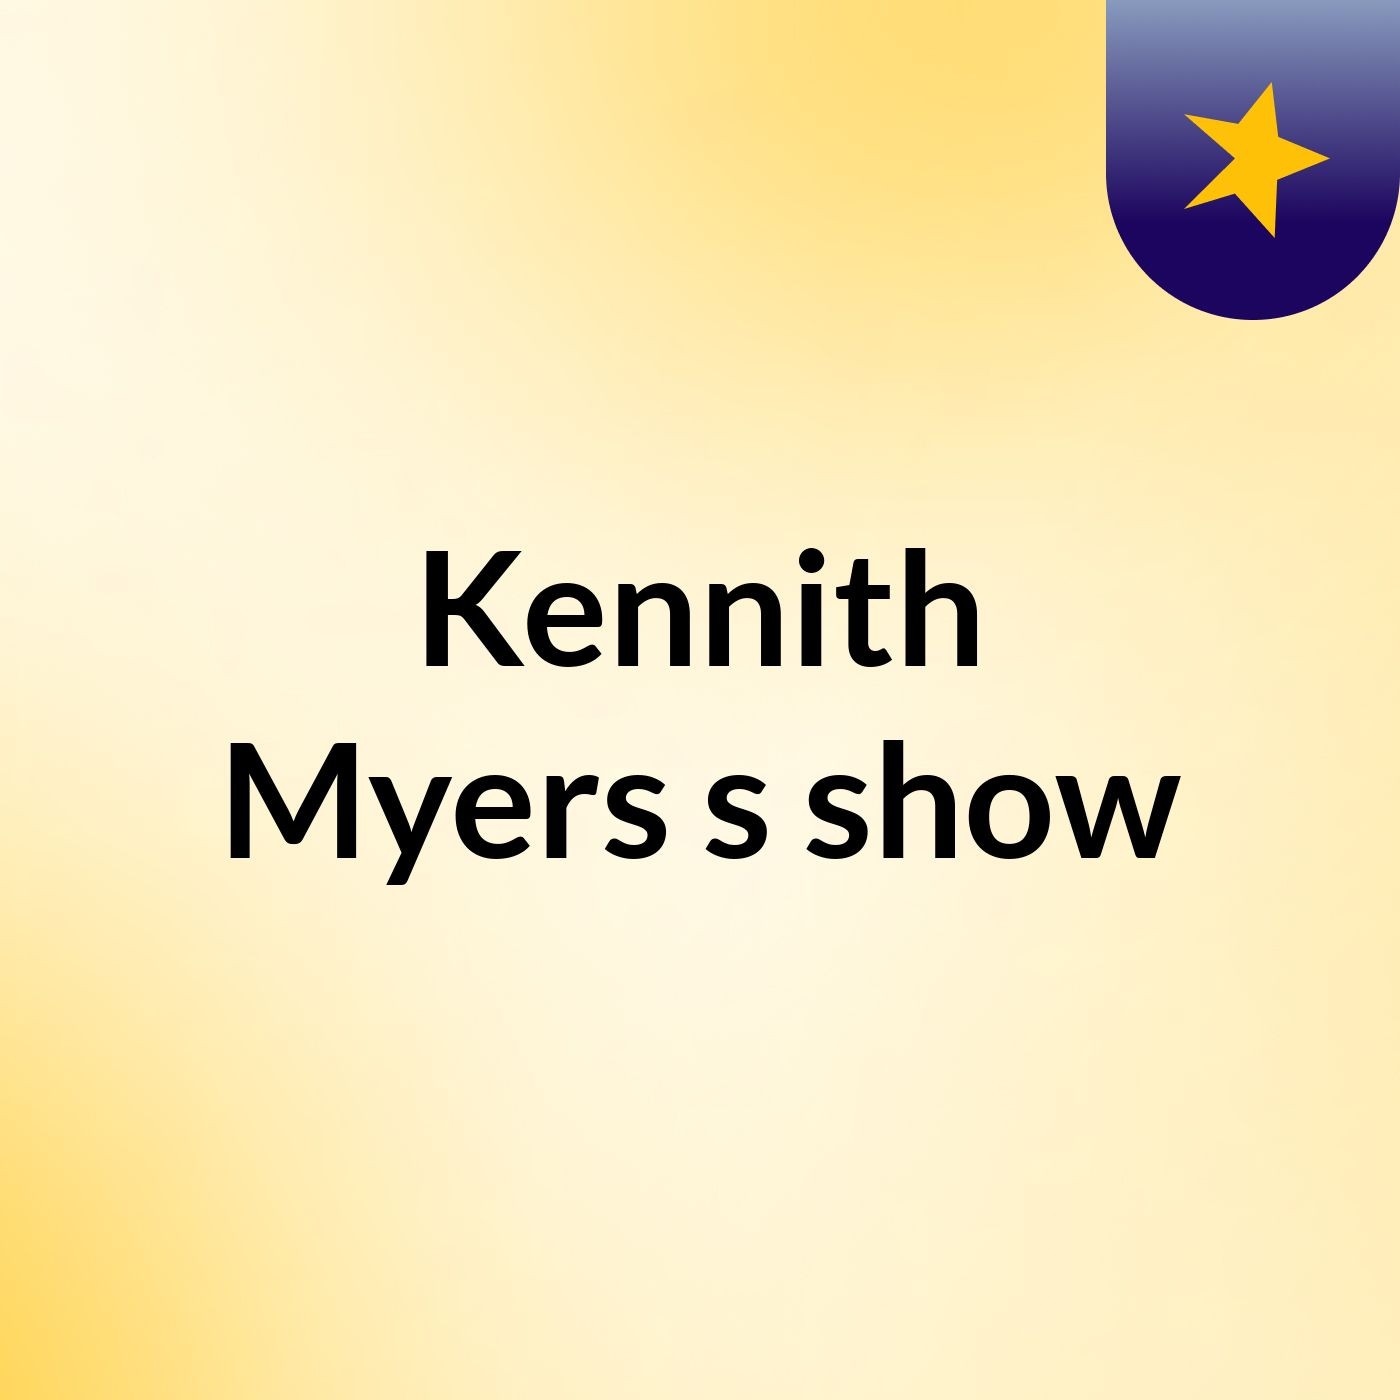 Kennith Myers's show